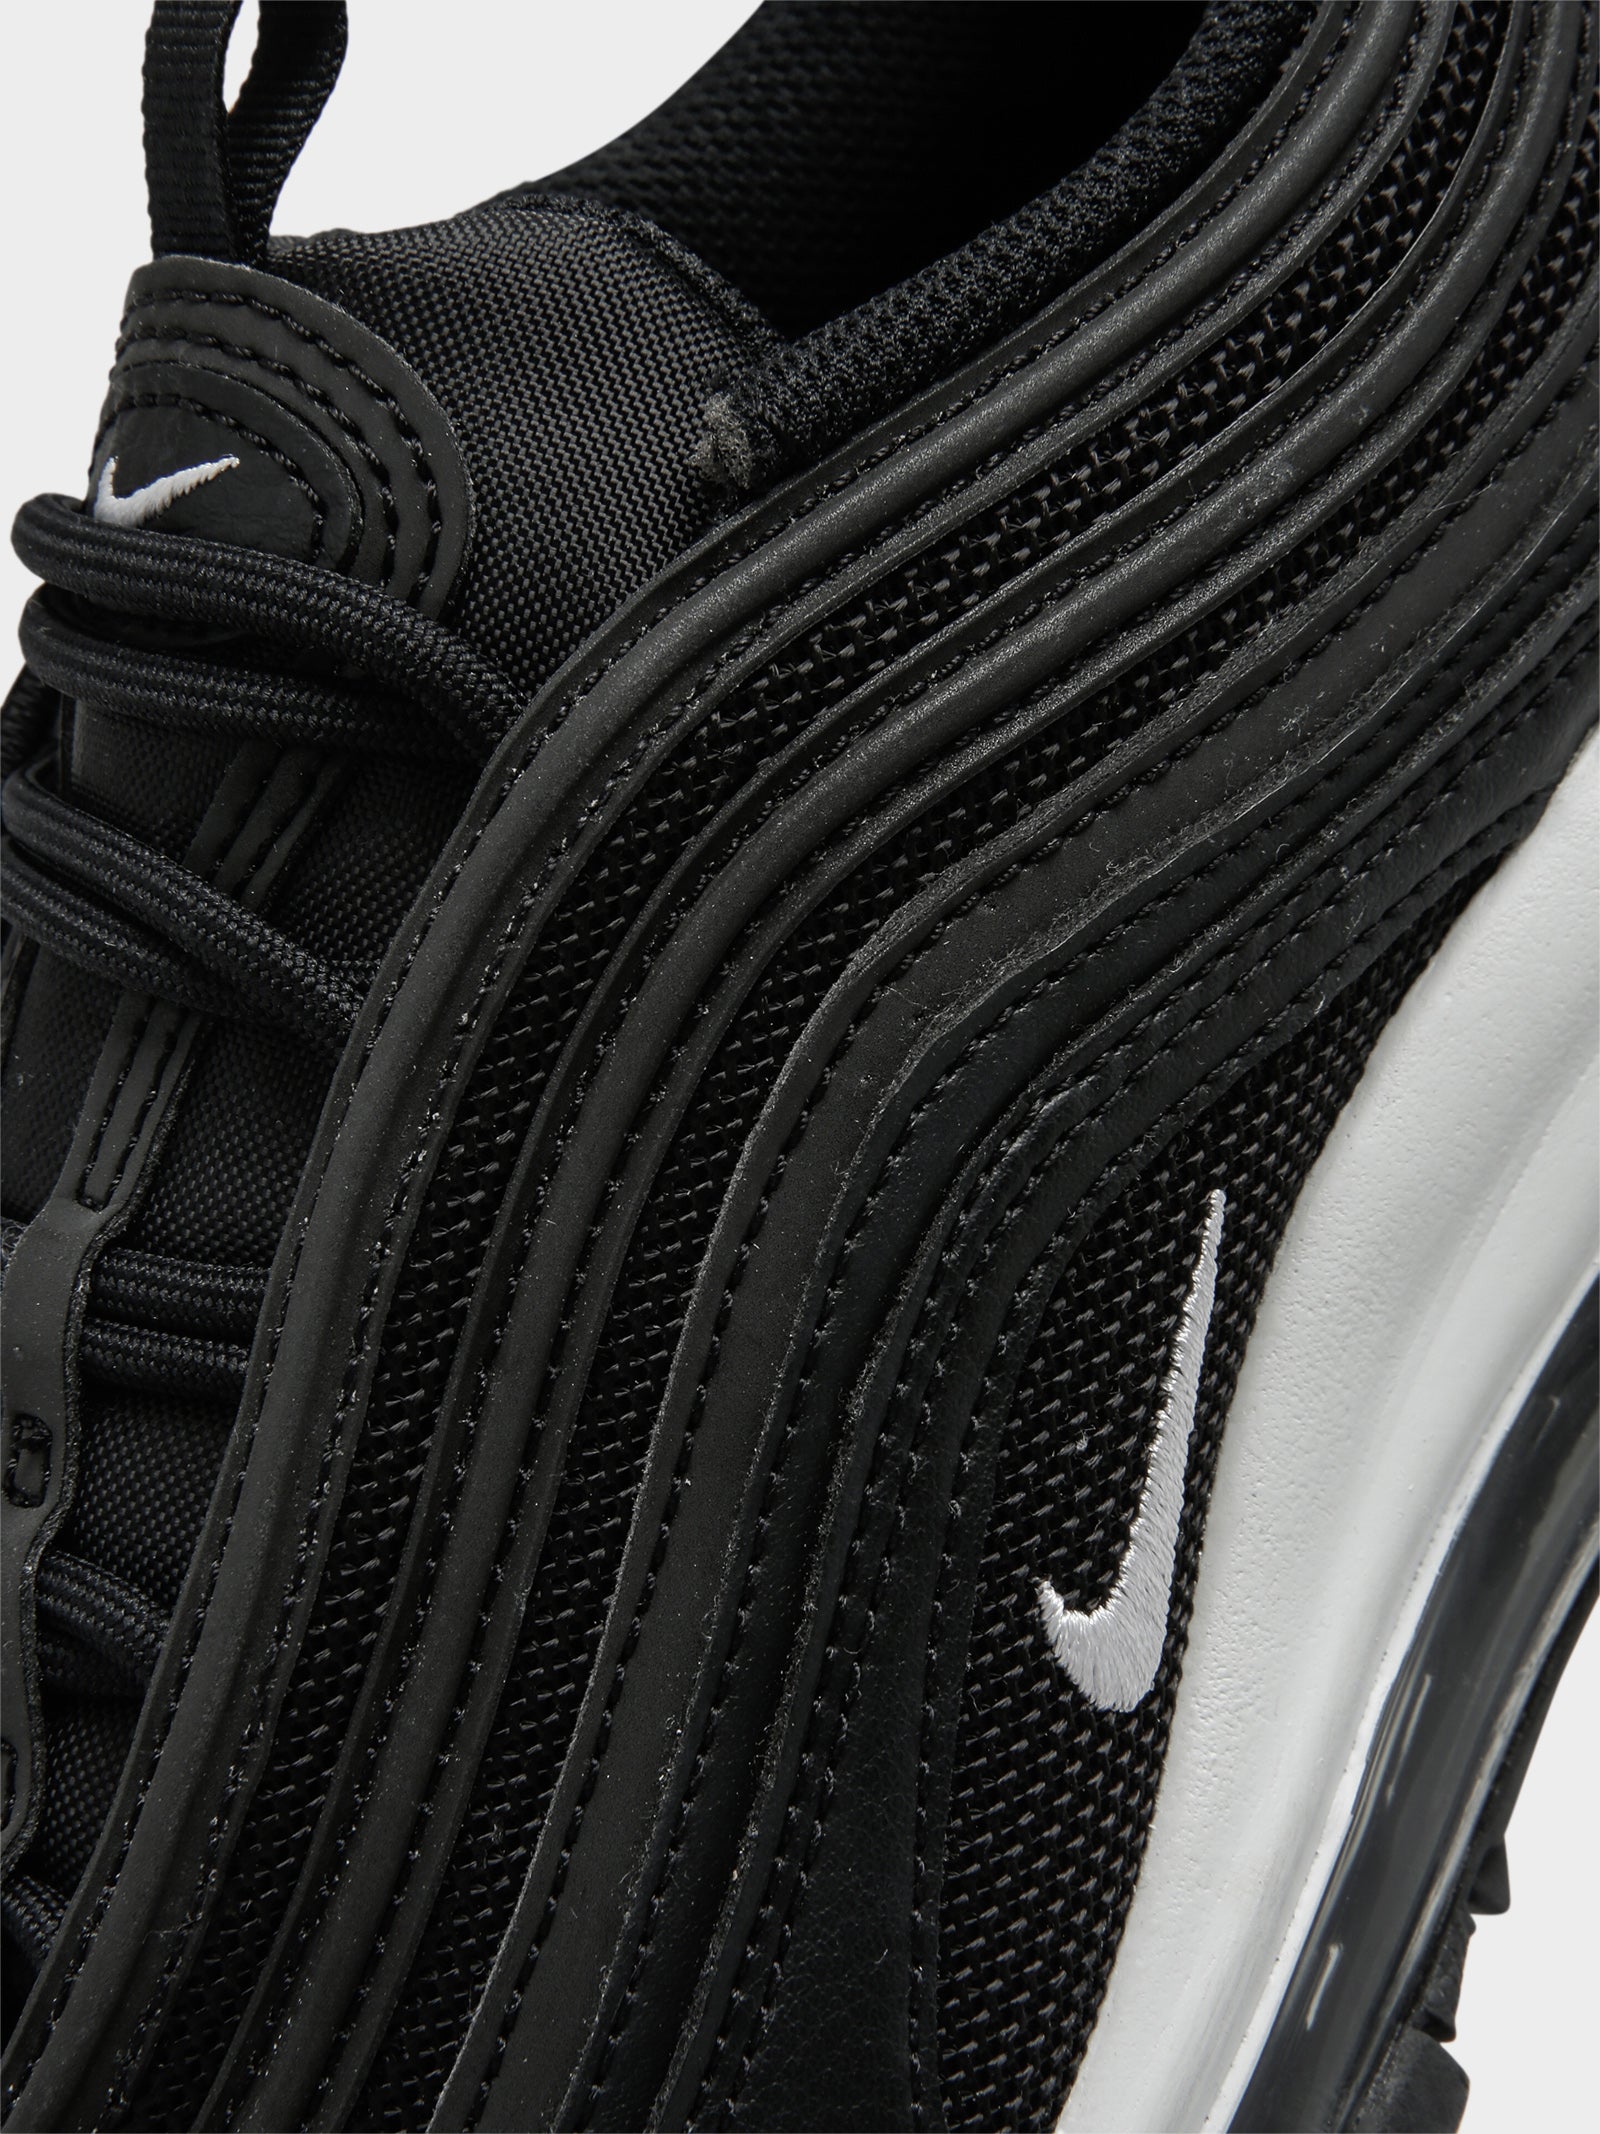 Womens Air Max 97 Sneakers in Black & White - Glue Store